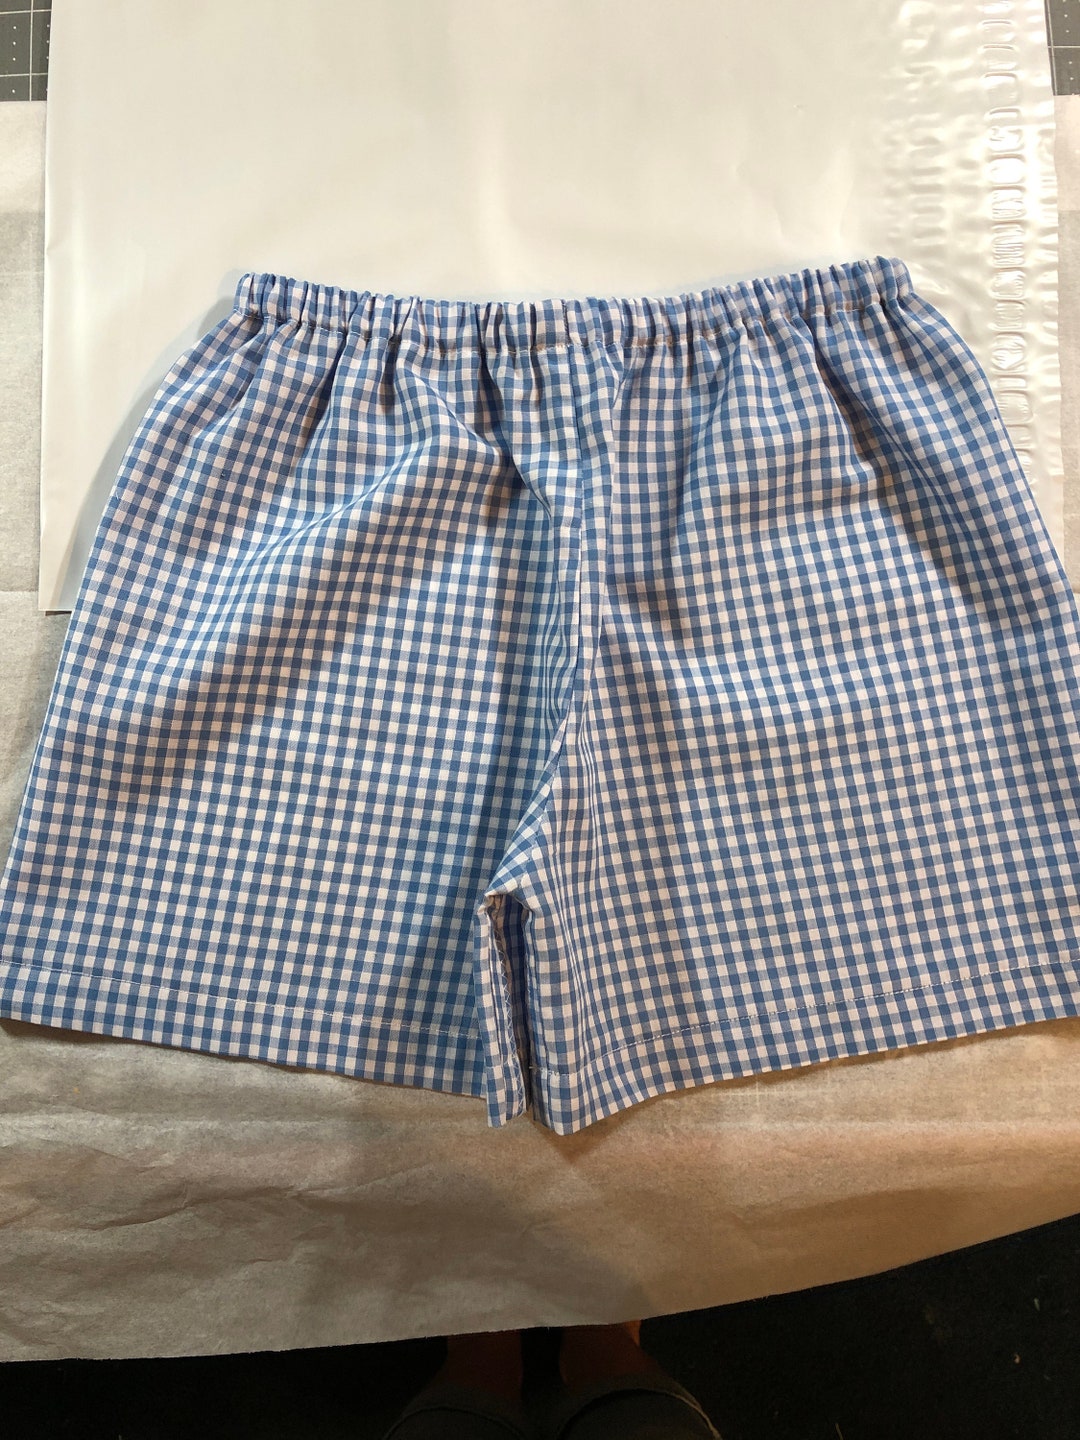 Gingham Shorts for Little Ones Cool and Comfy Multiple - Etsy